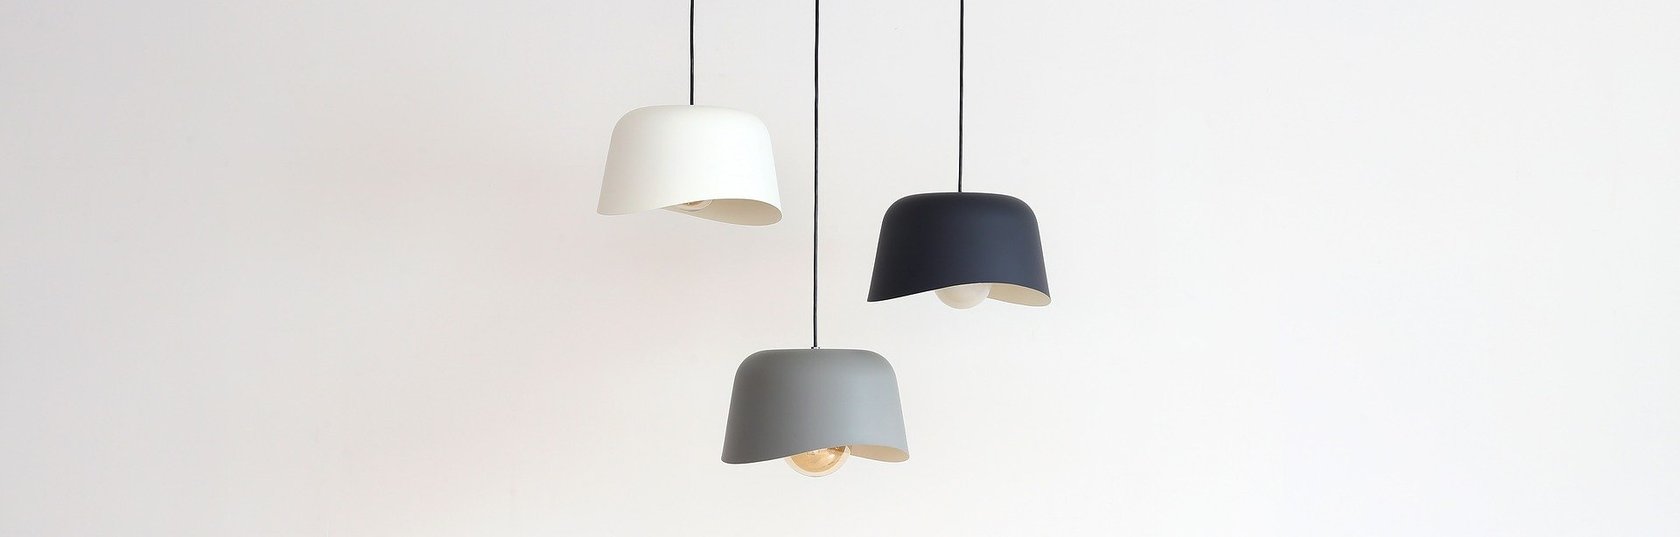 Pendant lights: what they are and their optimal layout